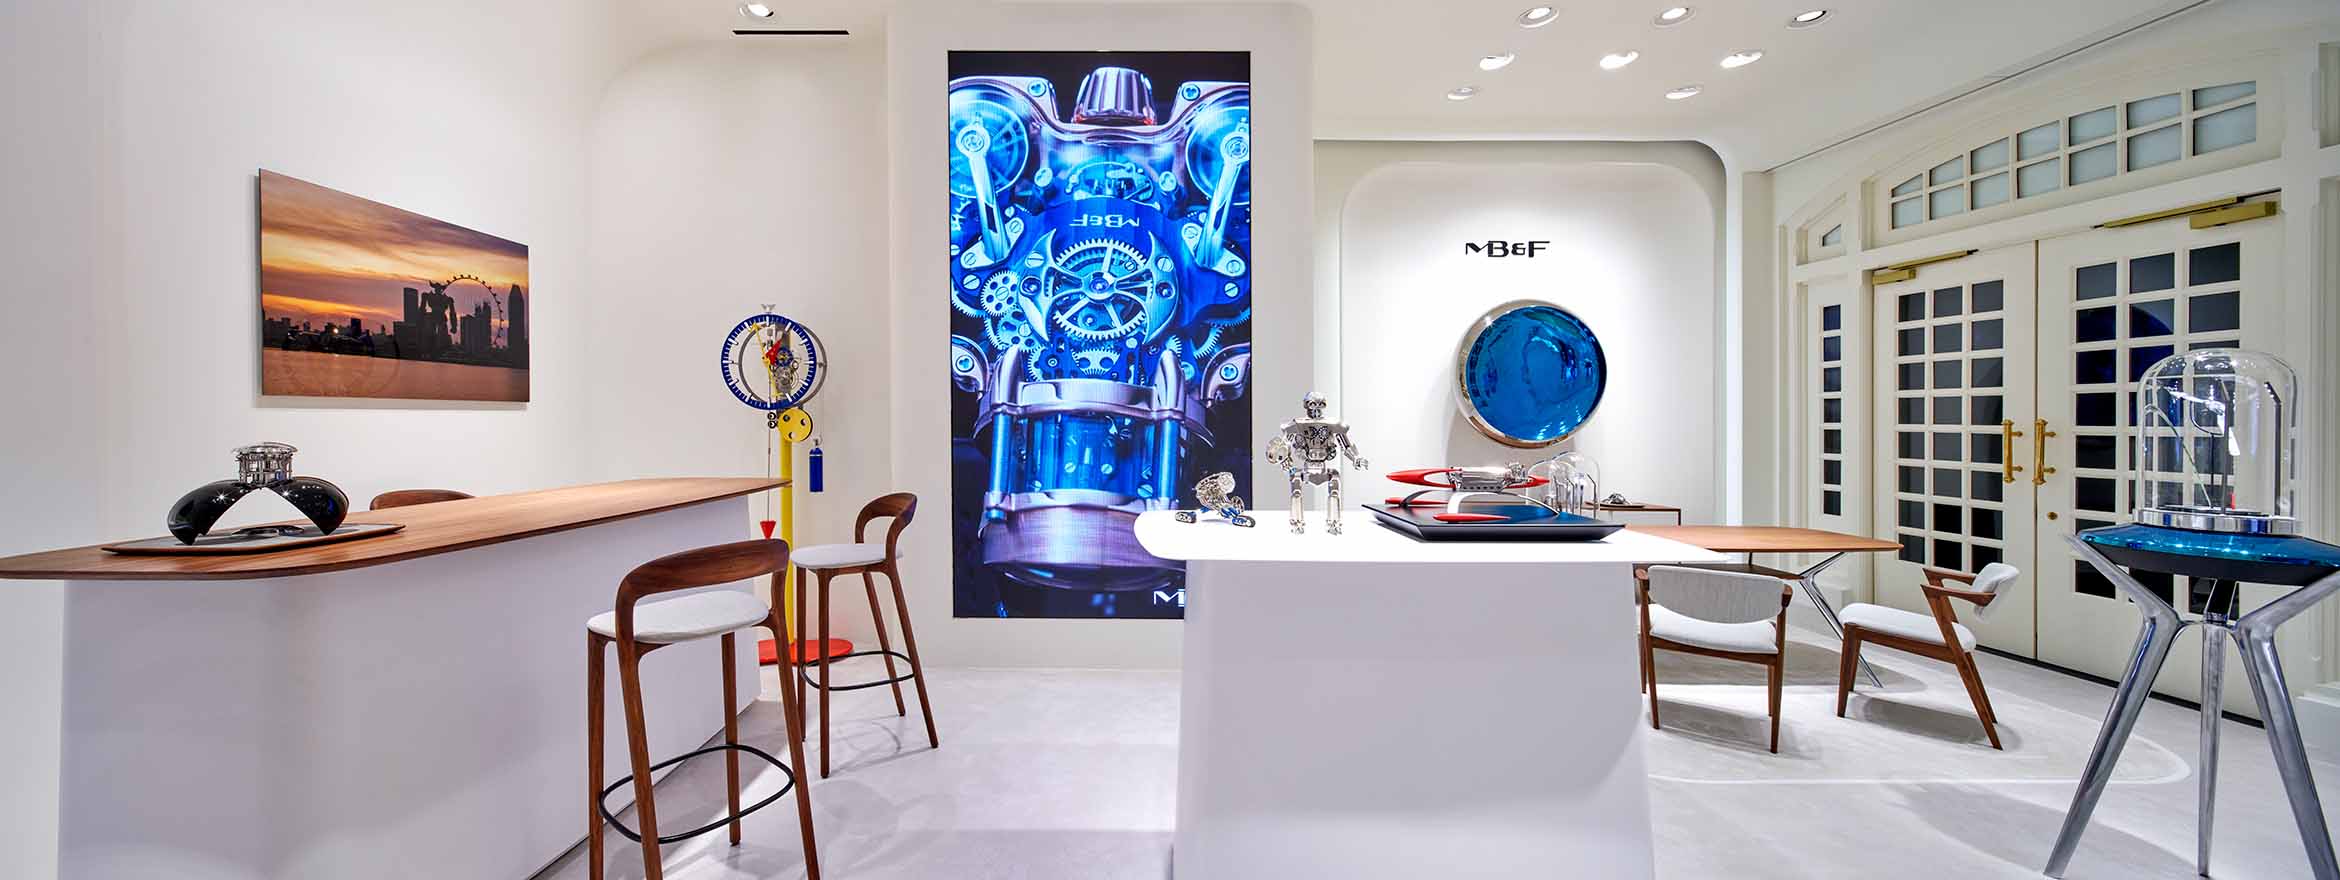 MB&F’s mechanical marvels celebrate the creativity of collaboration